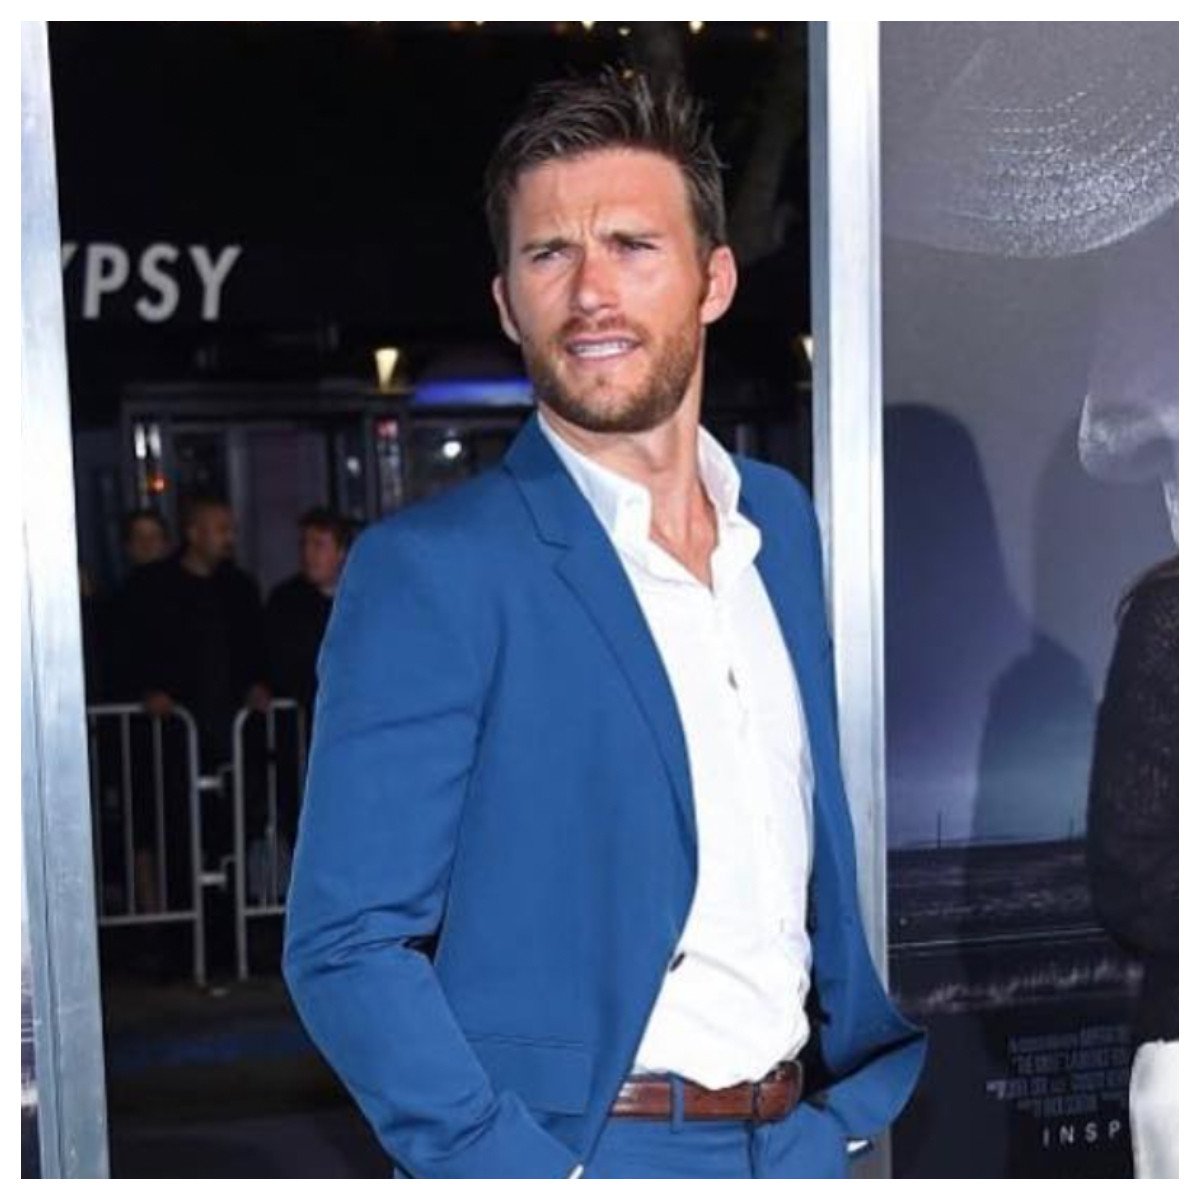 Meet Clint Eastwood's handsome actor-director son, Scott Eastwood: the  Suicide Squad star once got into a spat with Shia LaBeouf and Brad Pitt on  set and outed Ashton Kutcher for having an